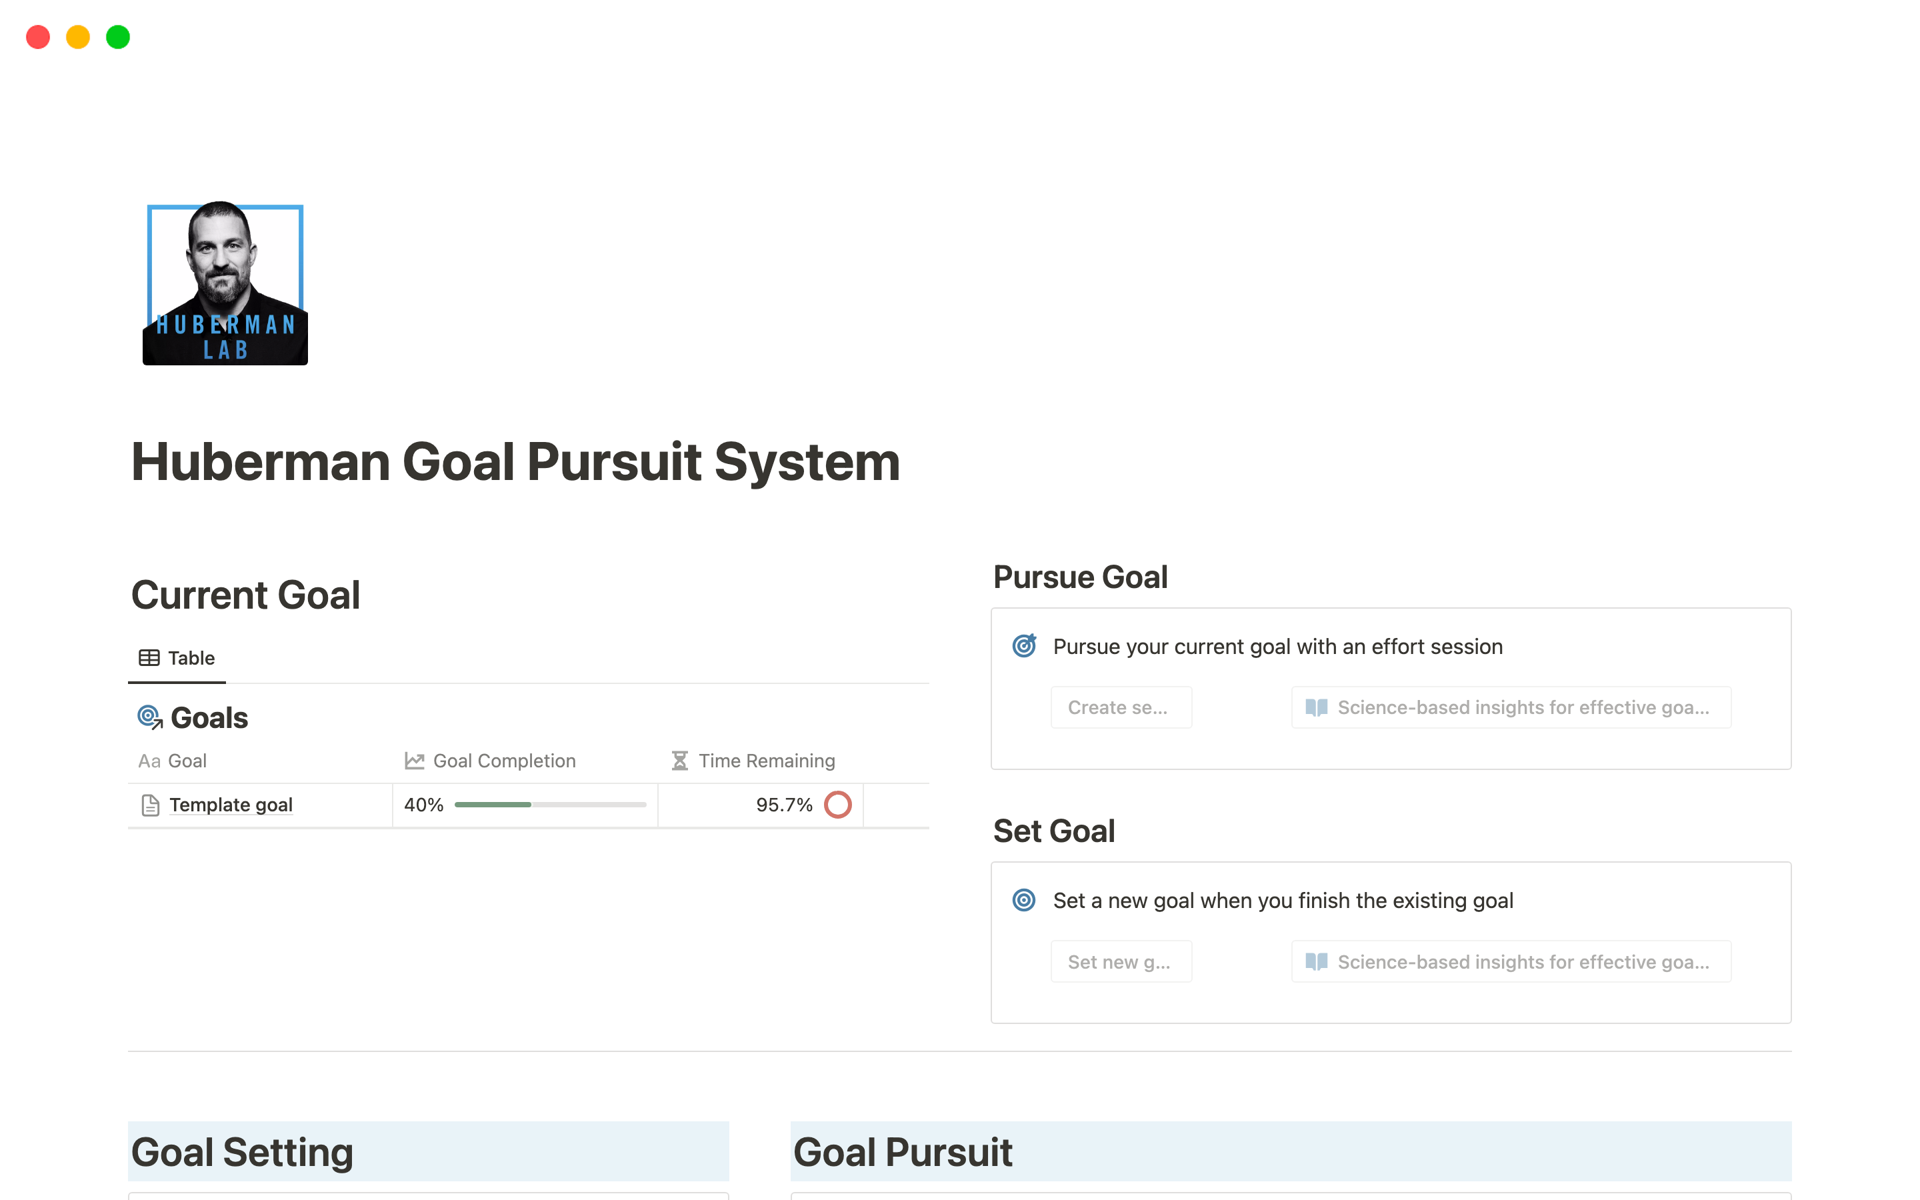 This template helps individuals set and pursue goals using the science-based goals toolkit introduced by Stanford neuroscientist Andrew Huberman.